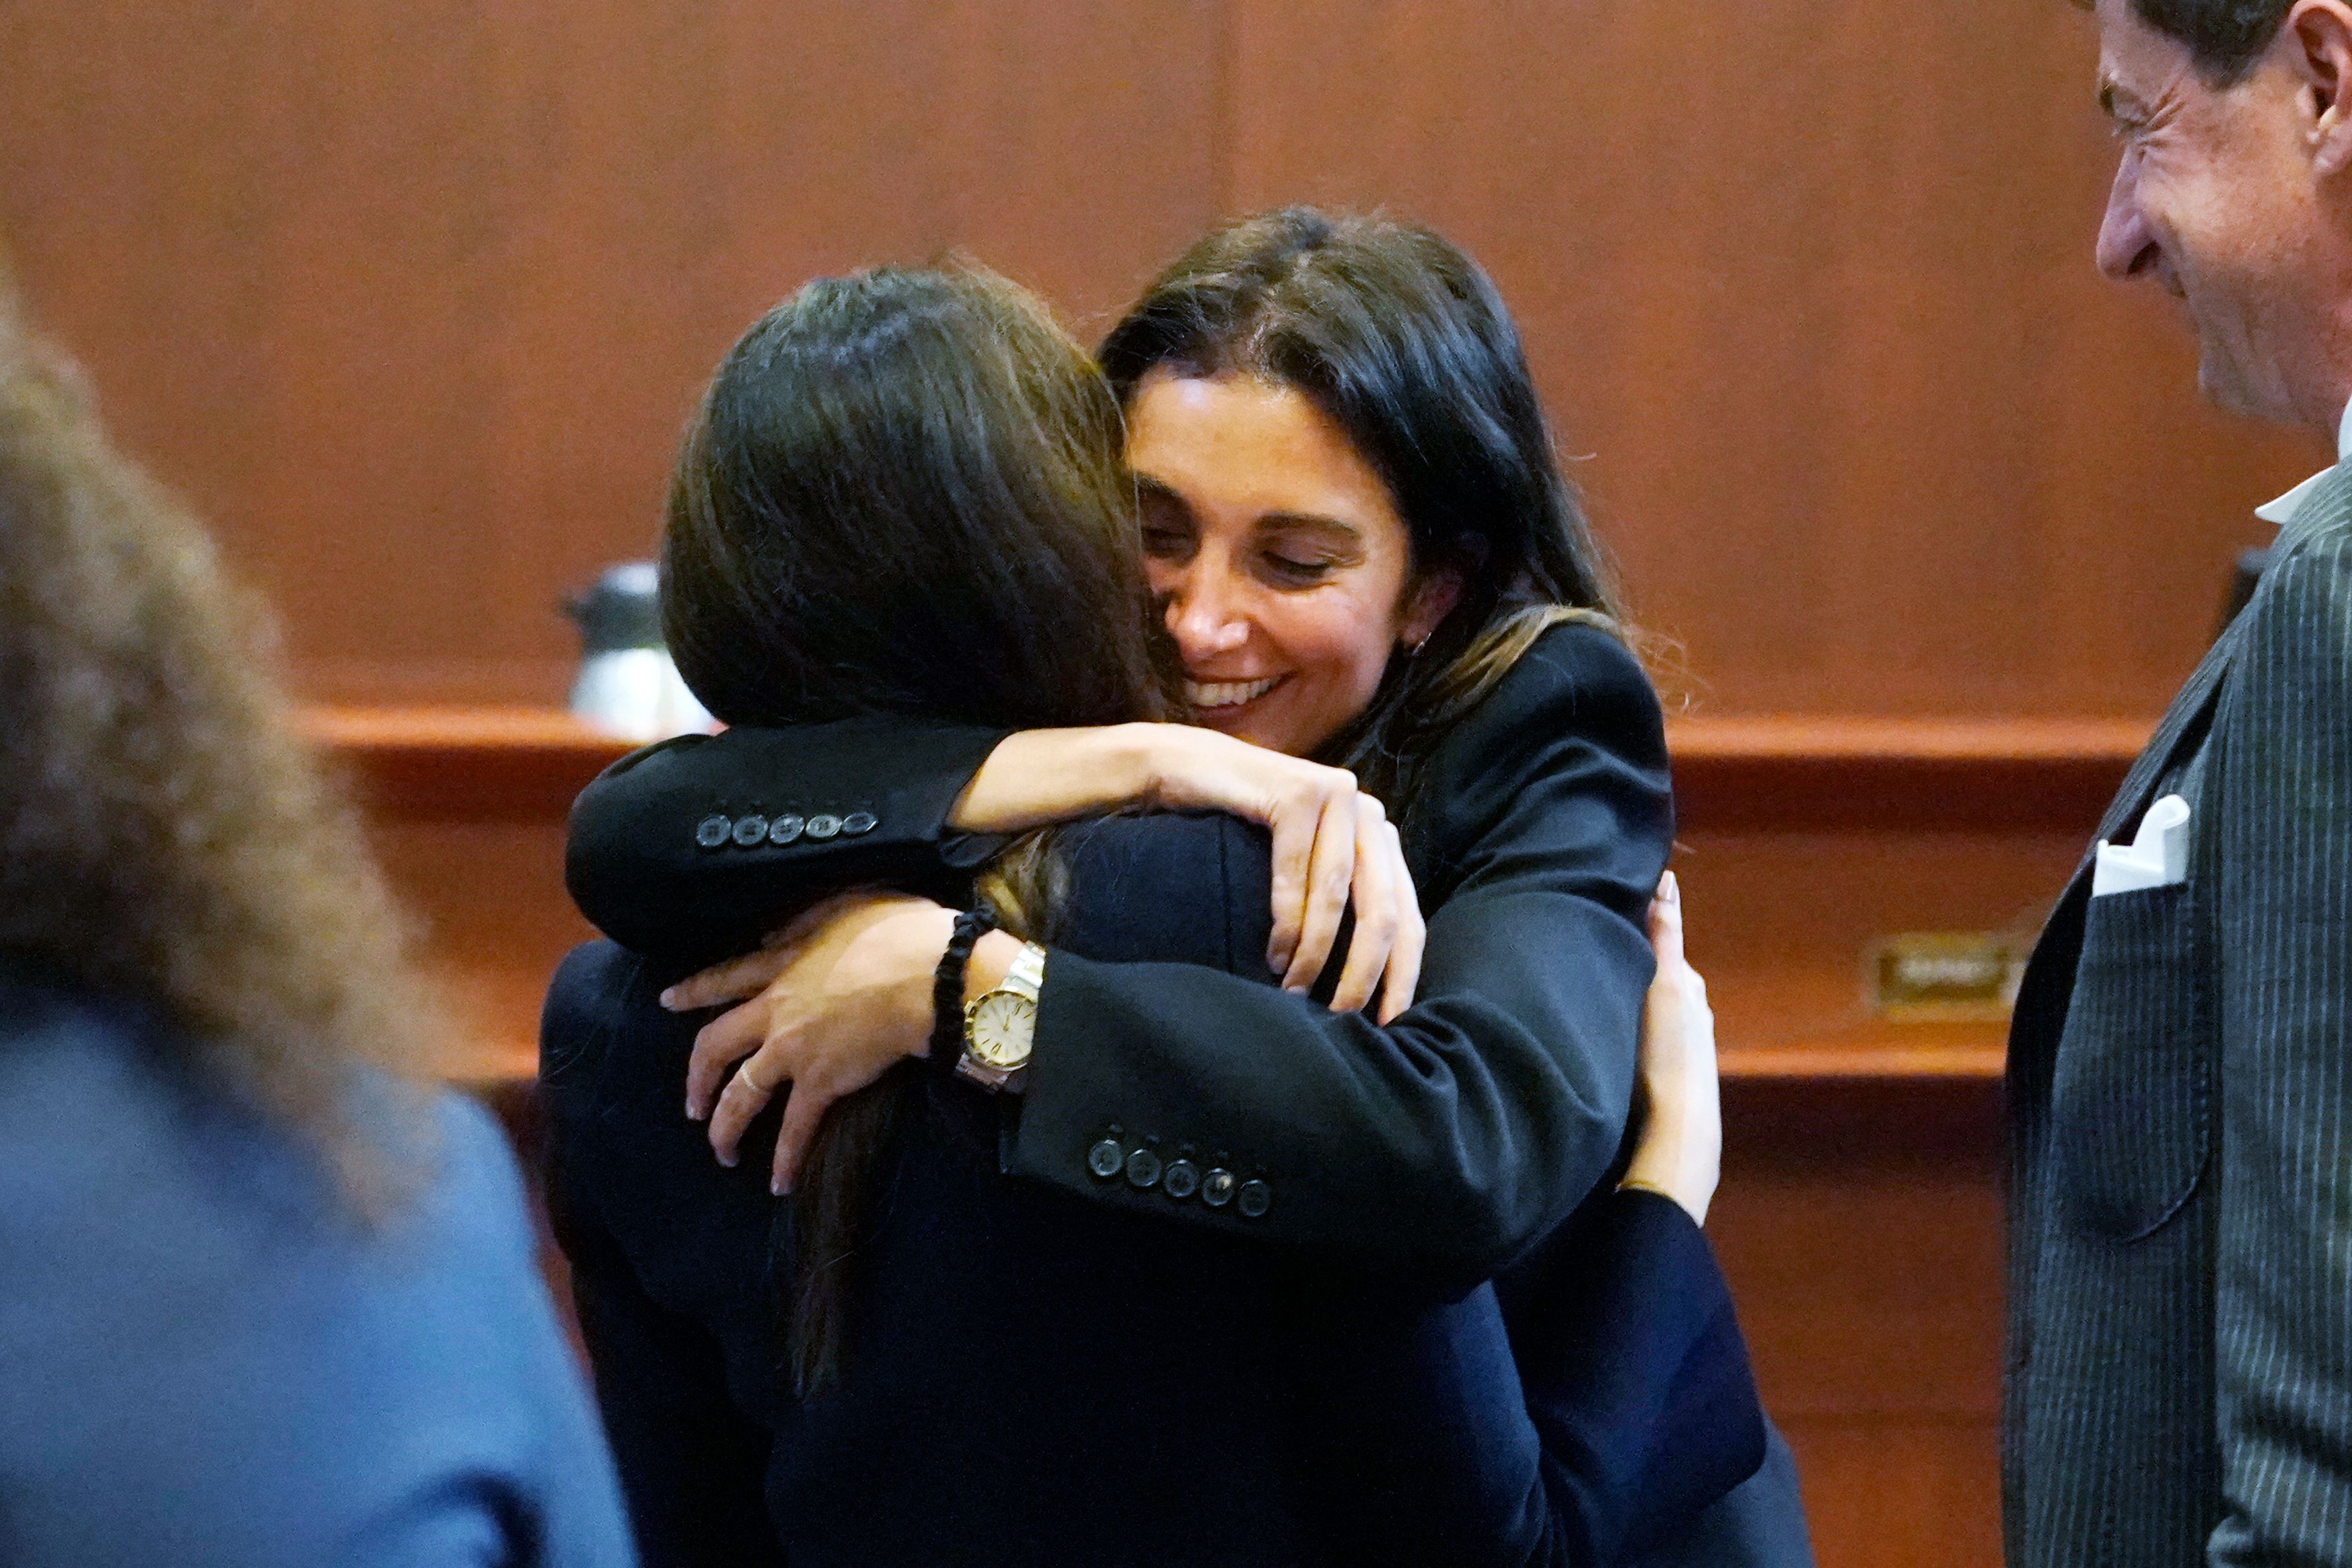 Attorney Joelle Rich hugs Attorney Camille Vasquez at the Fairfax County Circuit Courthouse on May 16, 2022 in Fairfax, Virginia.  |  Source: Getty Images